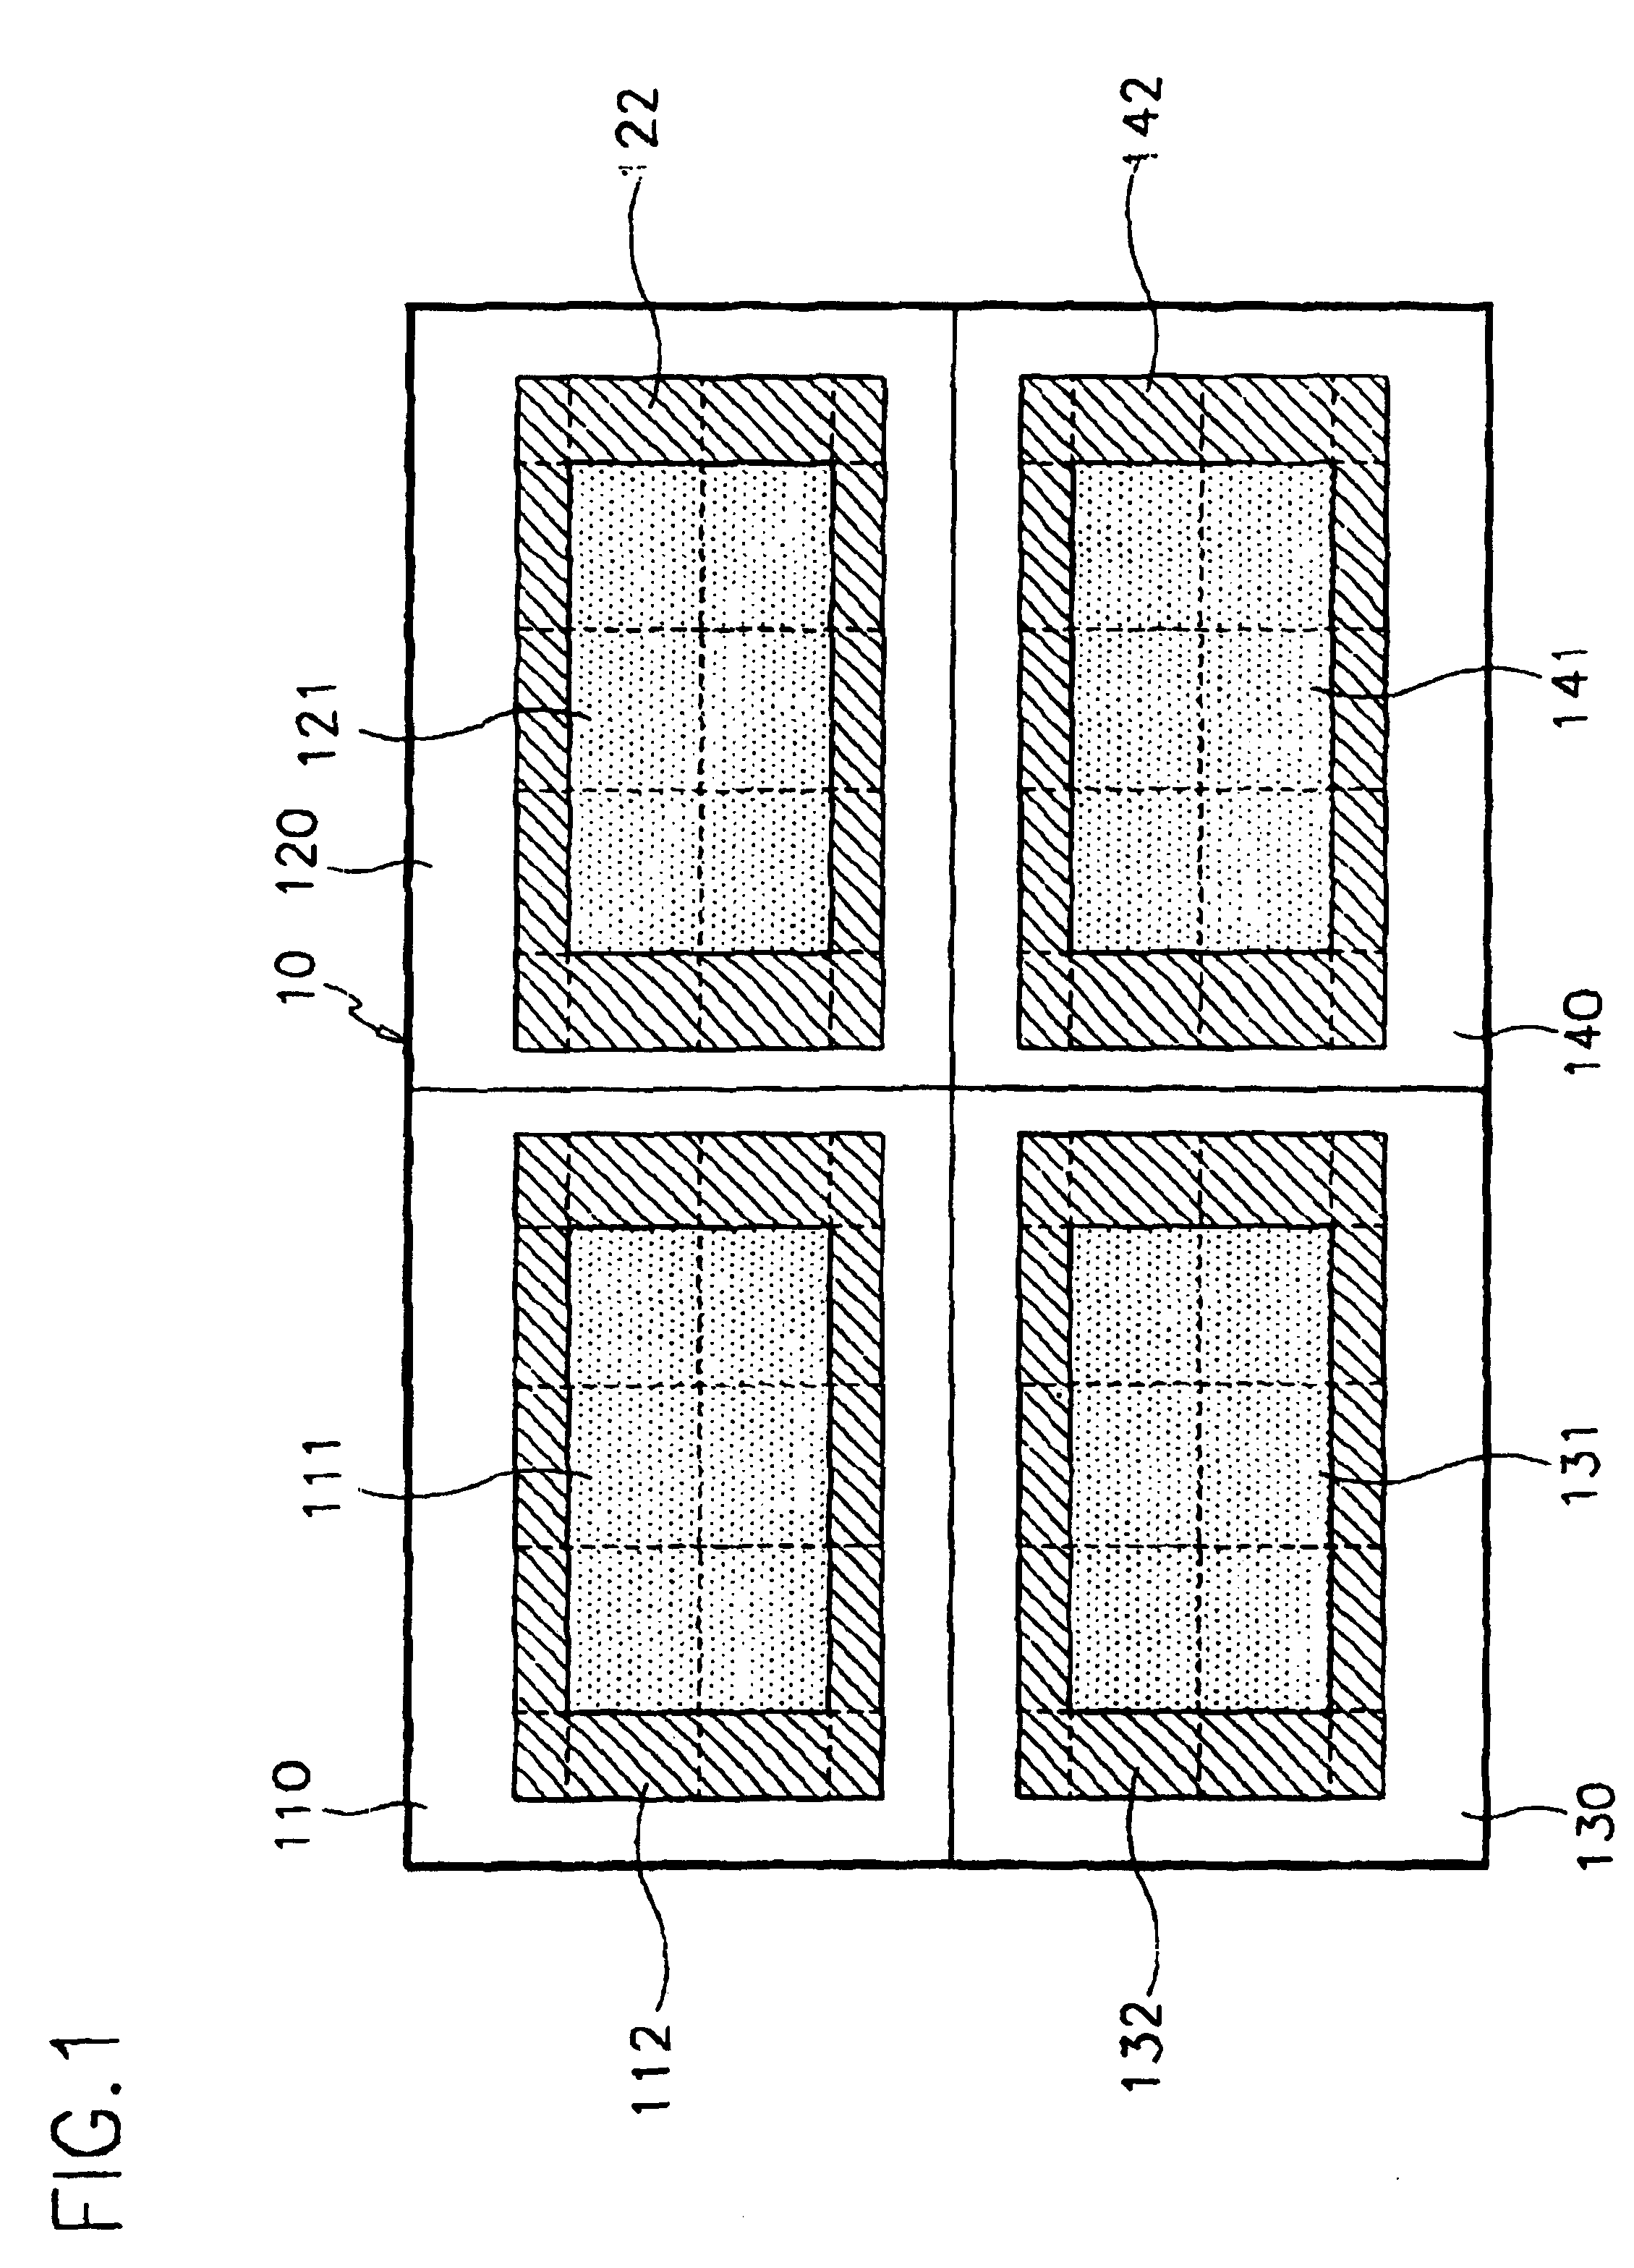 Thin film transistor array substrate for a liquid crystal display